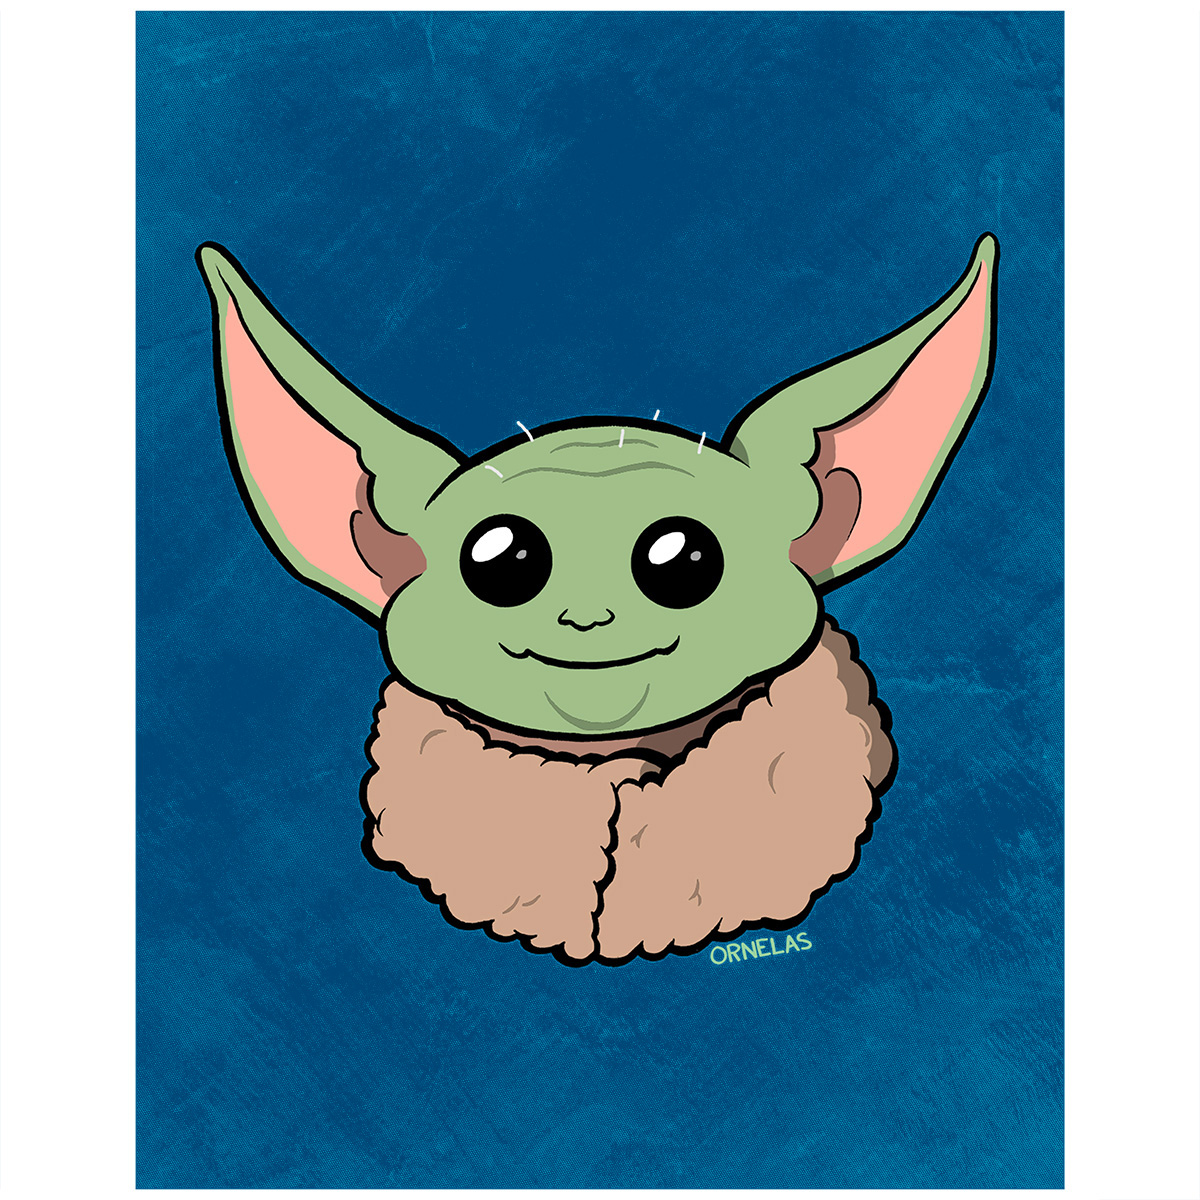 May The Tenth Be With You #BuyOrnelasArt
#commissionsopen #comicbooks #comix #supportlocalartists #shopsmall #supportindieartists #starwarsart #maythe4thbewithyou #maythefourth #themandalorian #grogu #babyyoda #DinGrogu